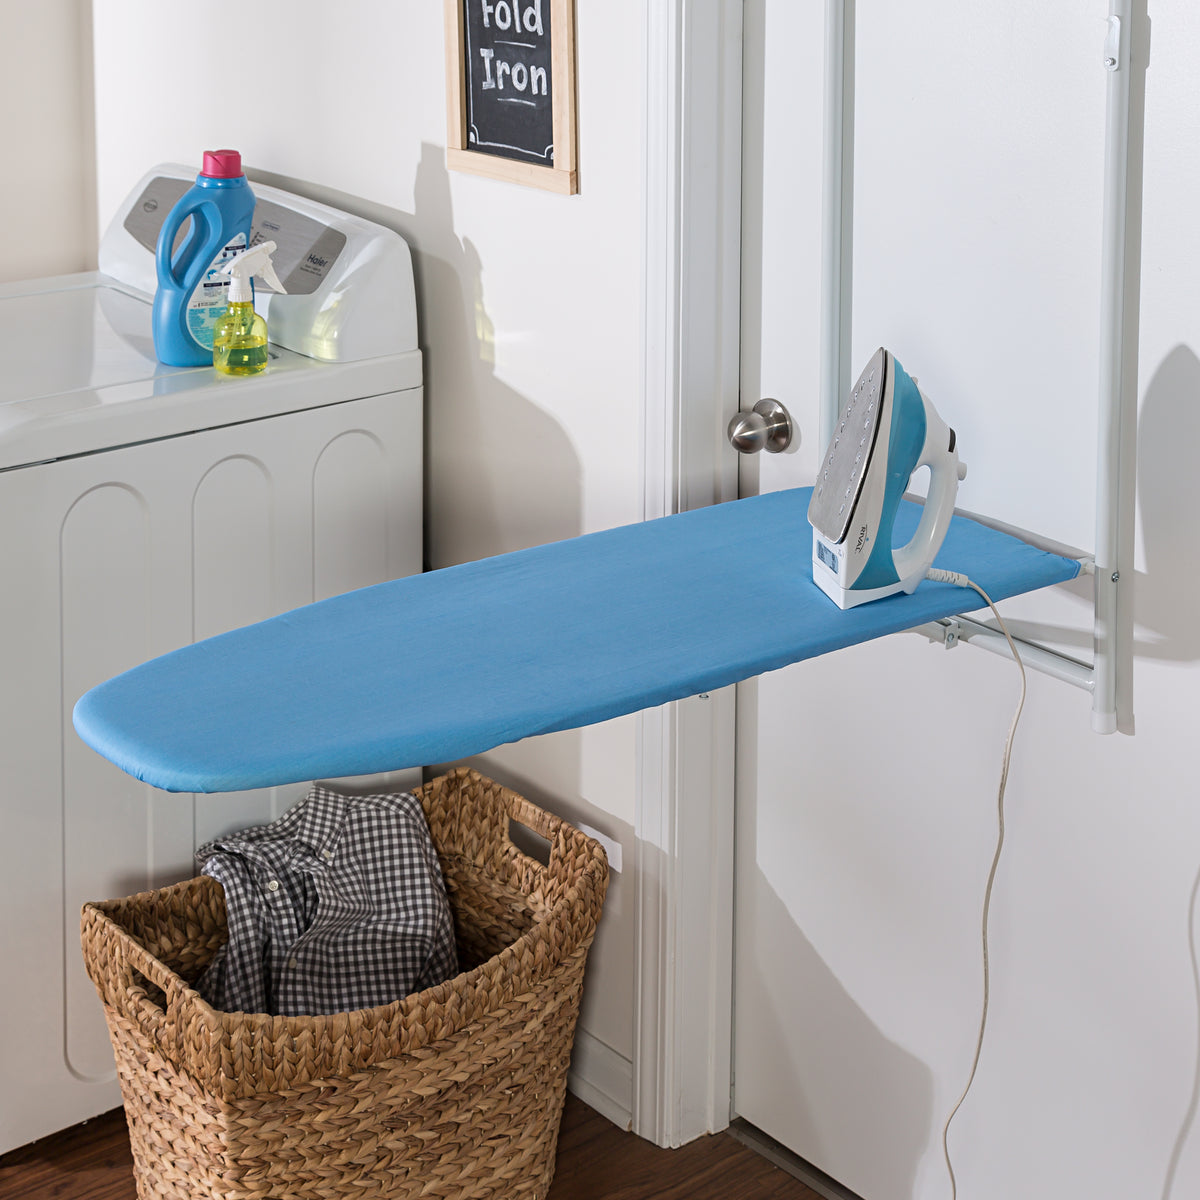 Household Ironing Board Ironing Mat For Table Top Dry-cleaning